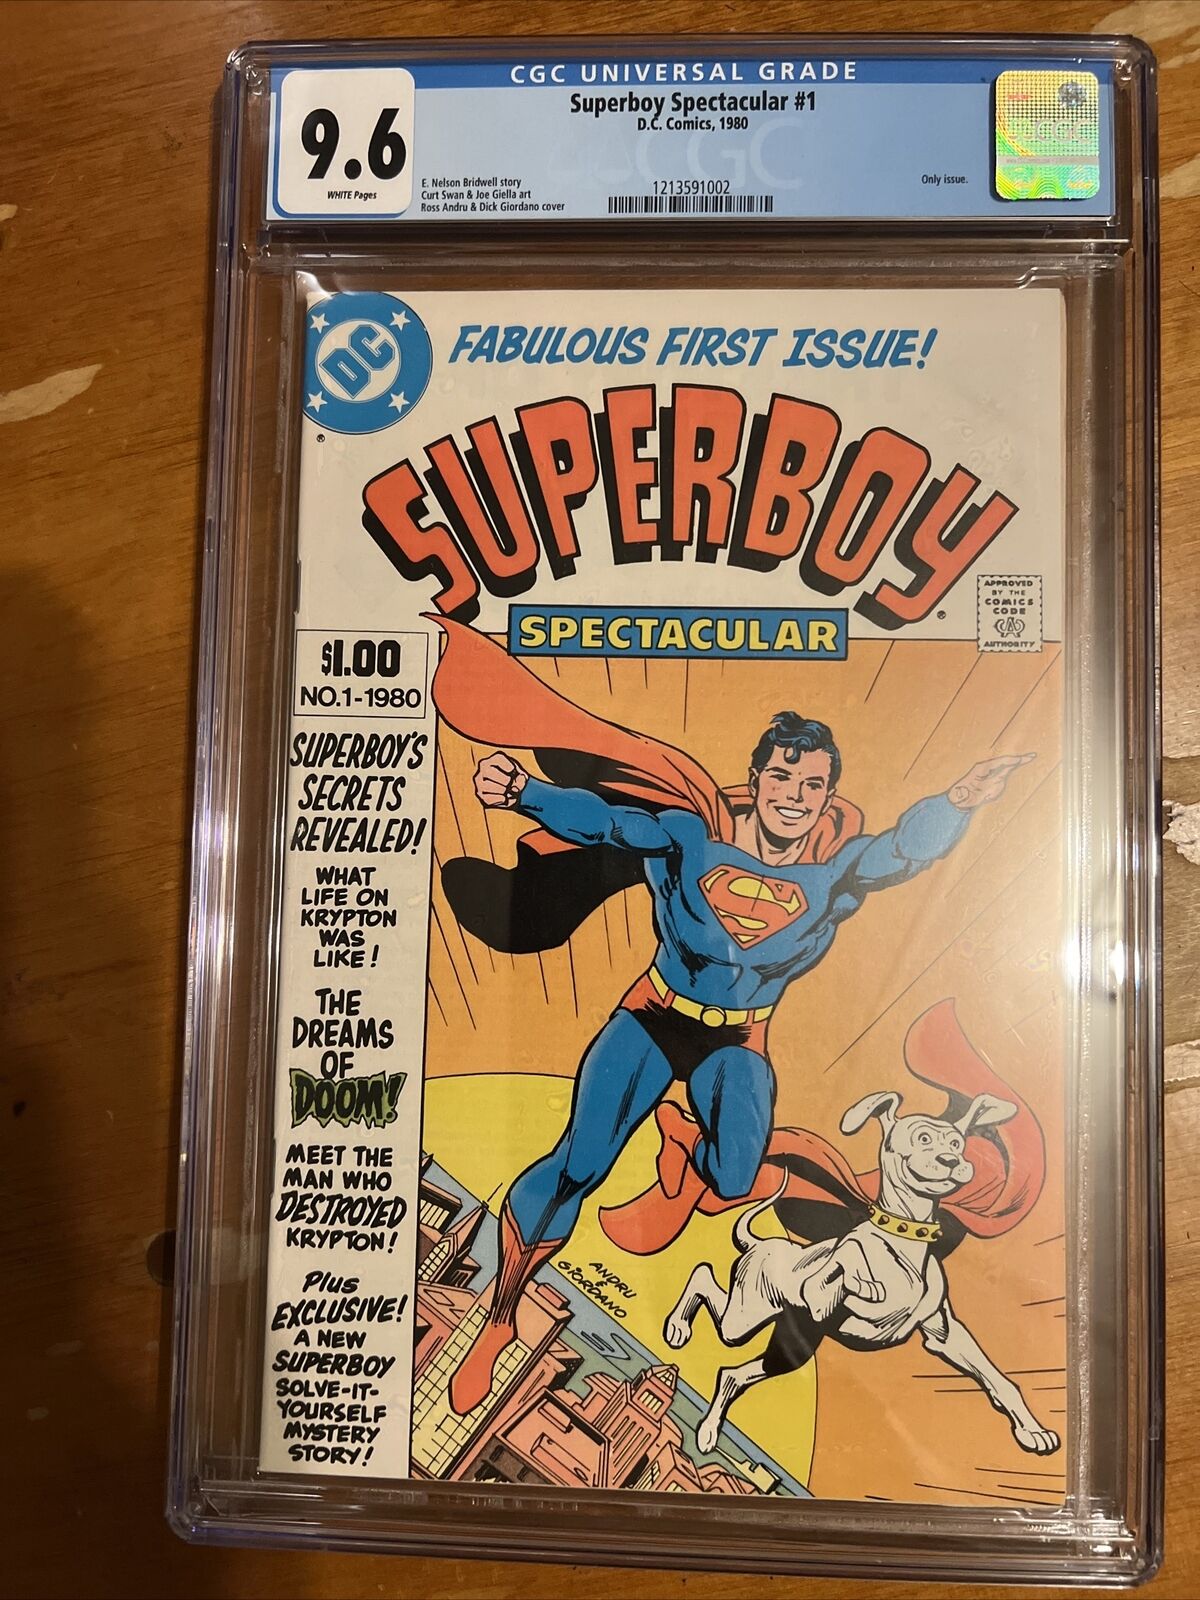 SUPERBOY SPECTACULAR # 1 DC COMICS 1980 FIRST BOOK ONLY DISTRIBUTED COMIC SHOPS